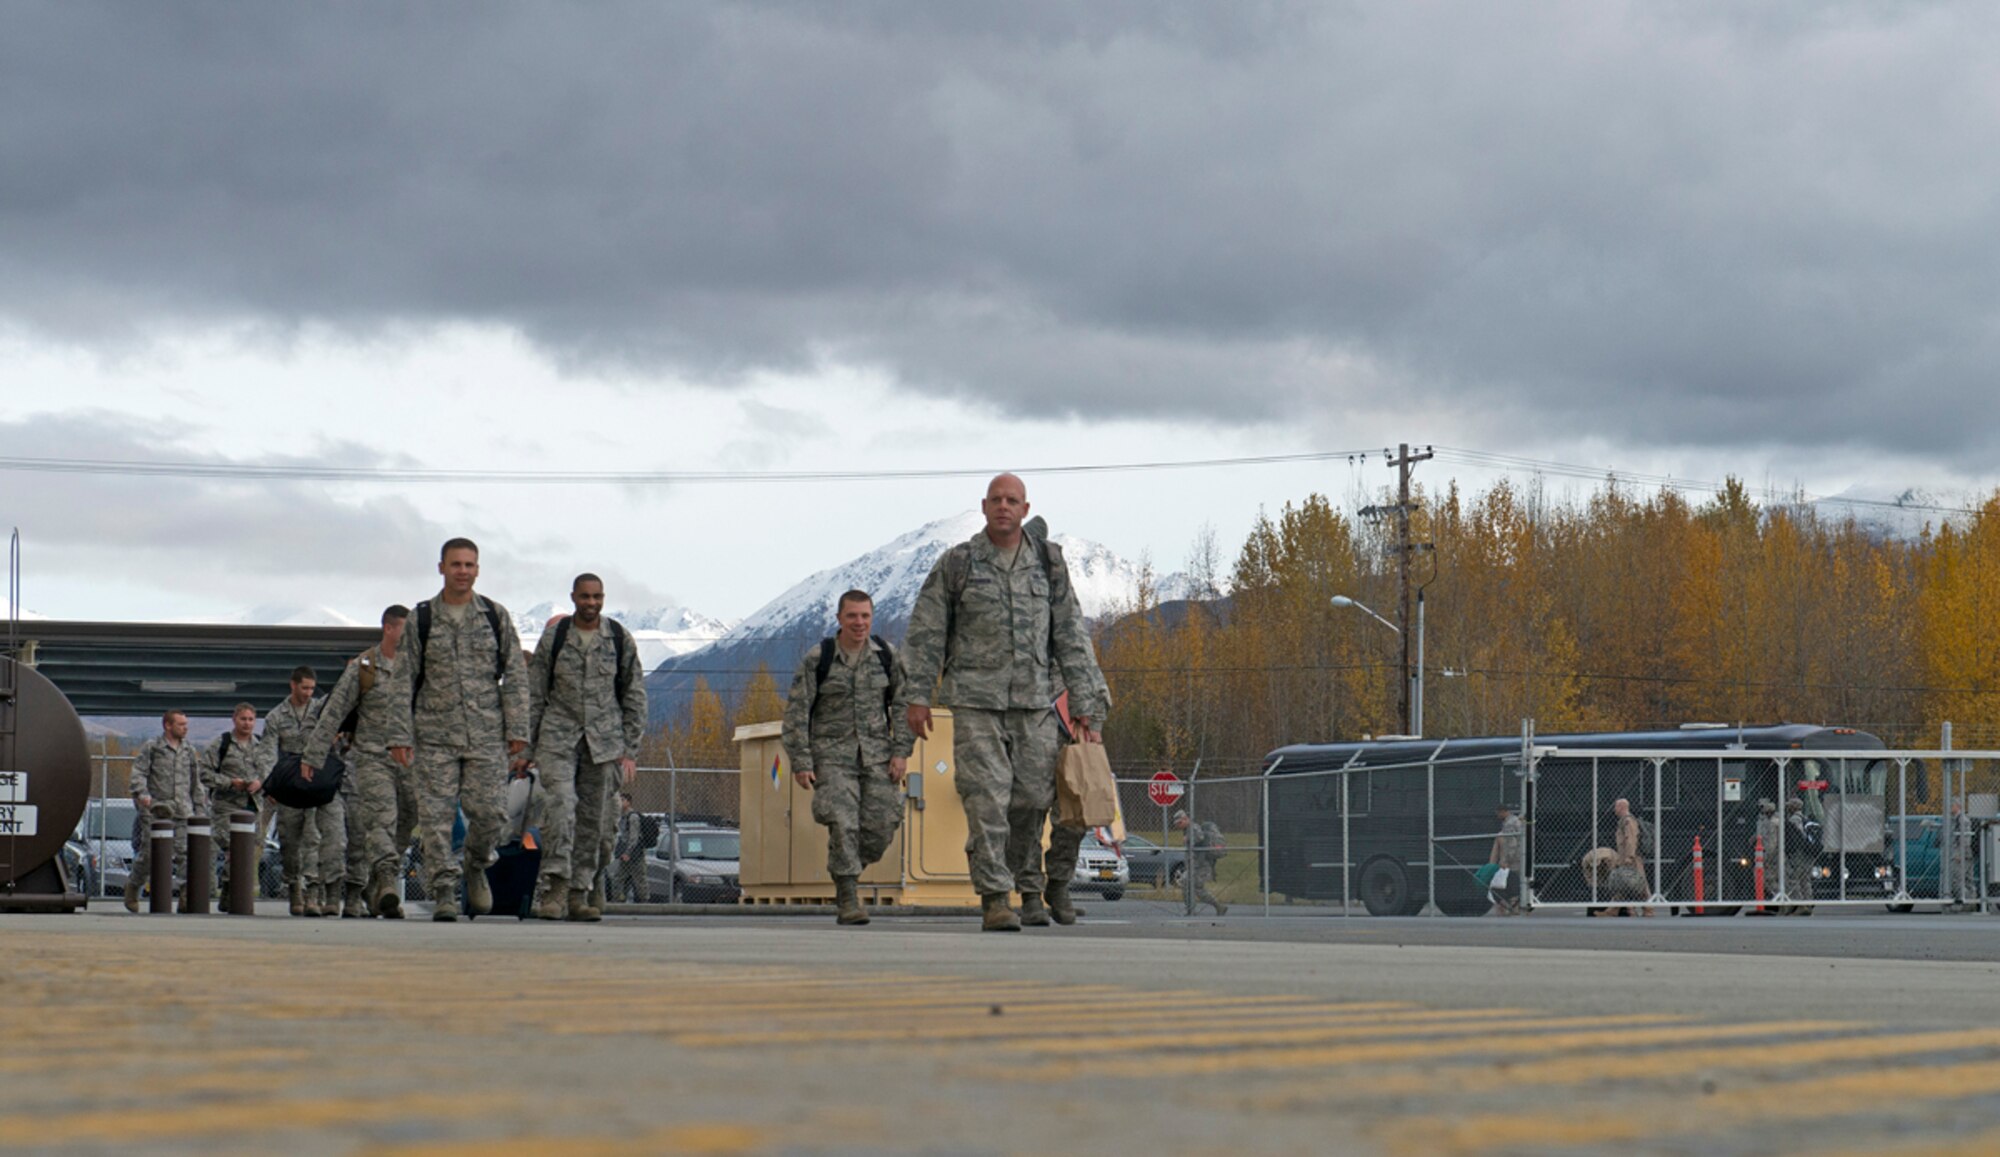 Airmen from the 90th Fighter Squadron and other 3rd Wing units get off a bus and walk to the 525th Fighter Squadron hangar where family and friends wait to welcome them home on Joint Base Elmendorf-Richardson, Oct. 7, 2013. They were deployed for five months and returned to friends and families in an emotional homecoming. (U.S. Air Force photo/Staff Sgt. Zachary Wolf)